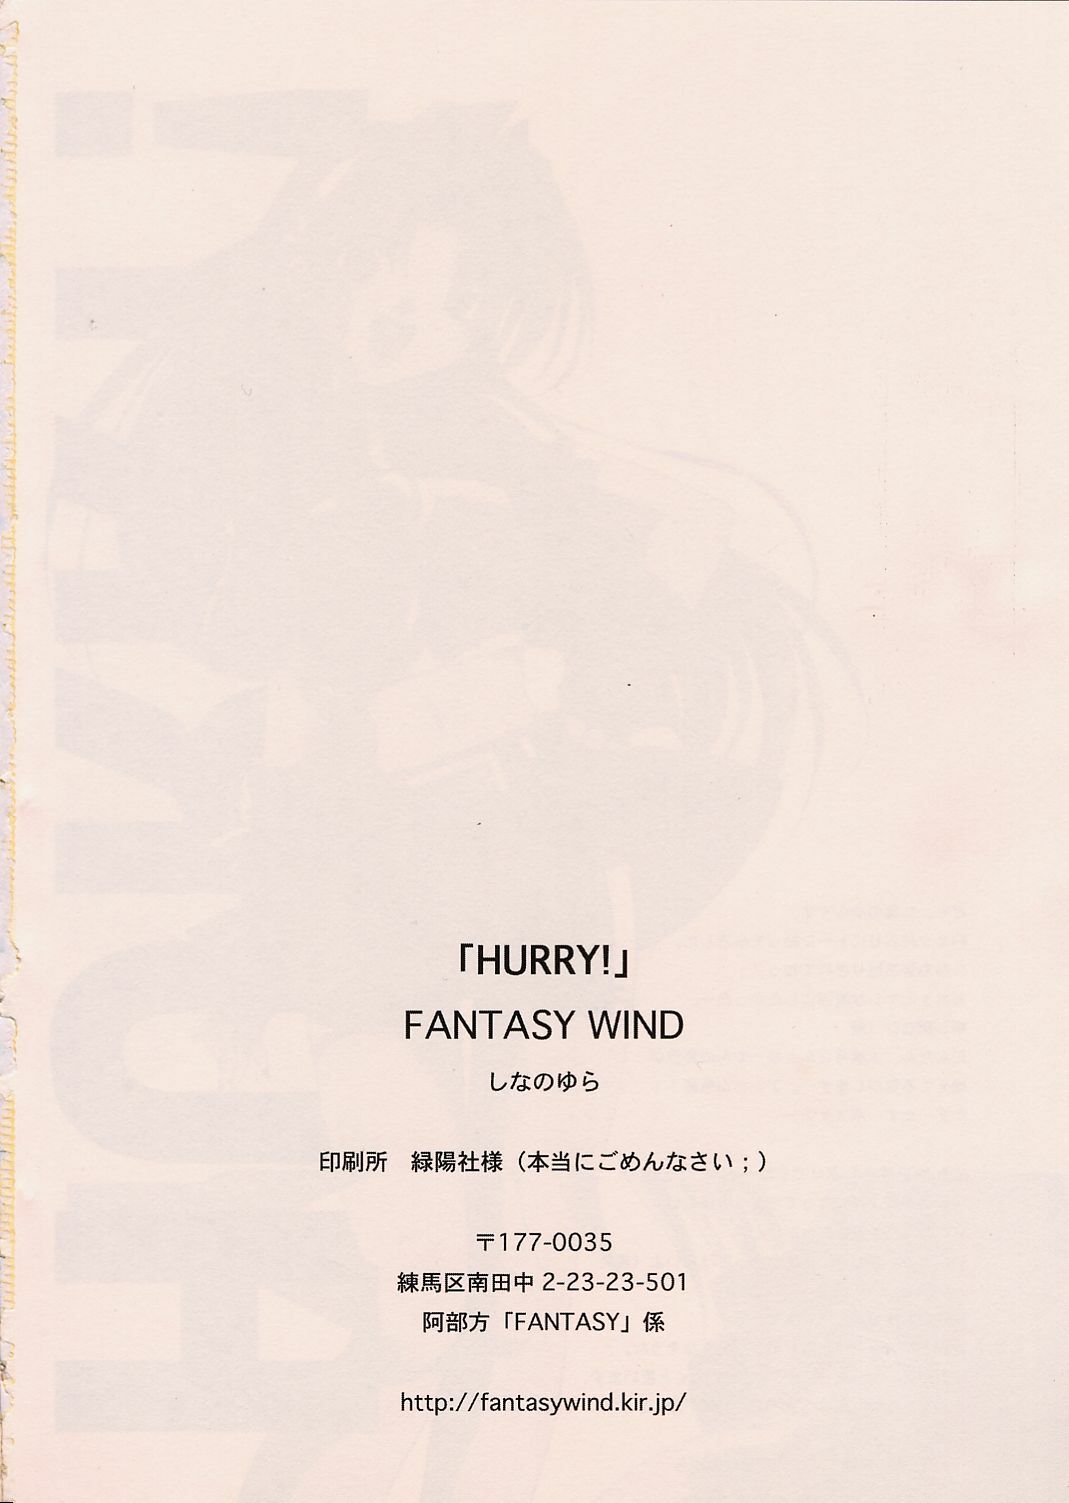 [Fantasy Wind (Shinano Yura)] HURRY! (King of Fighters) page 29 full